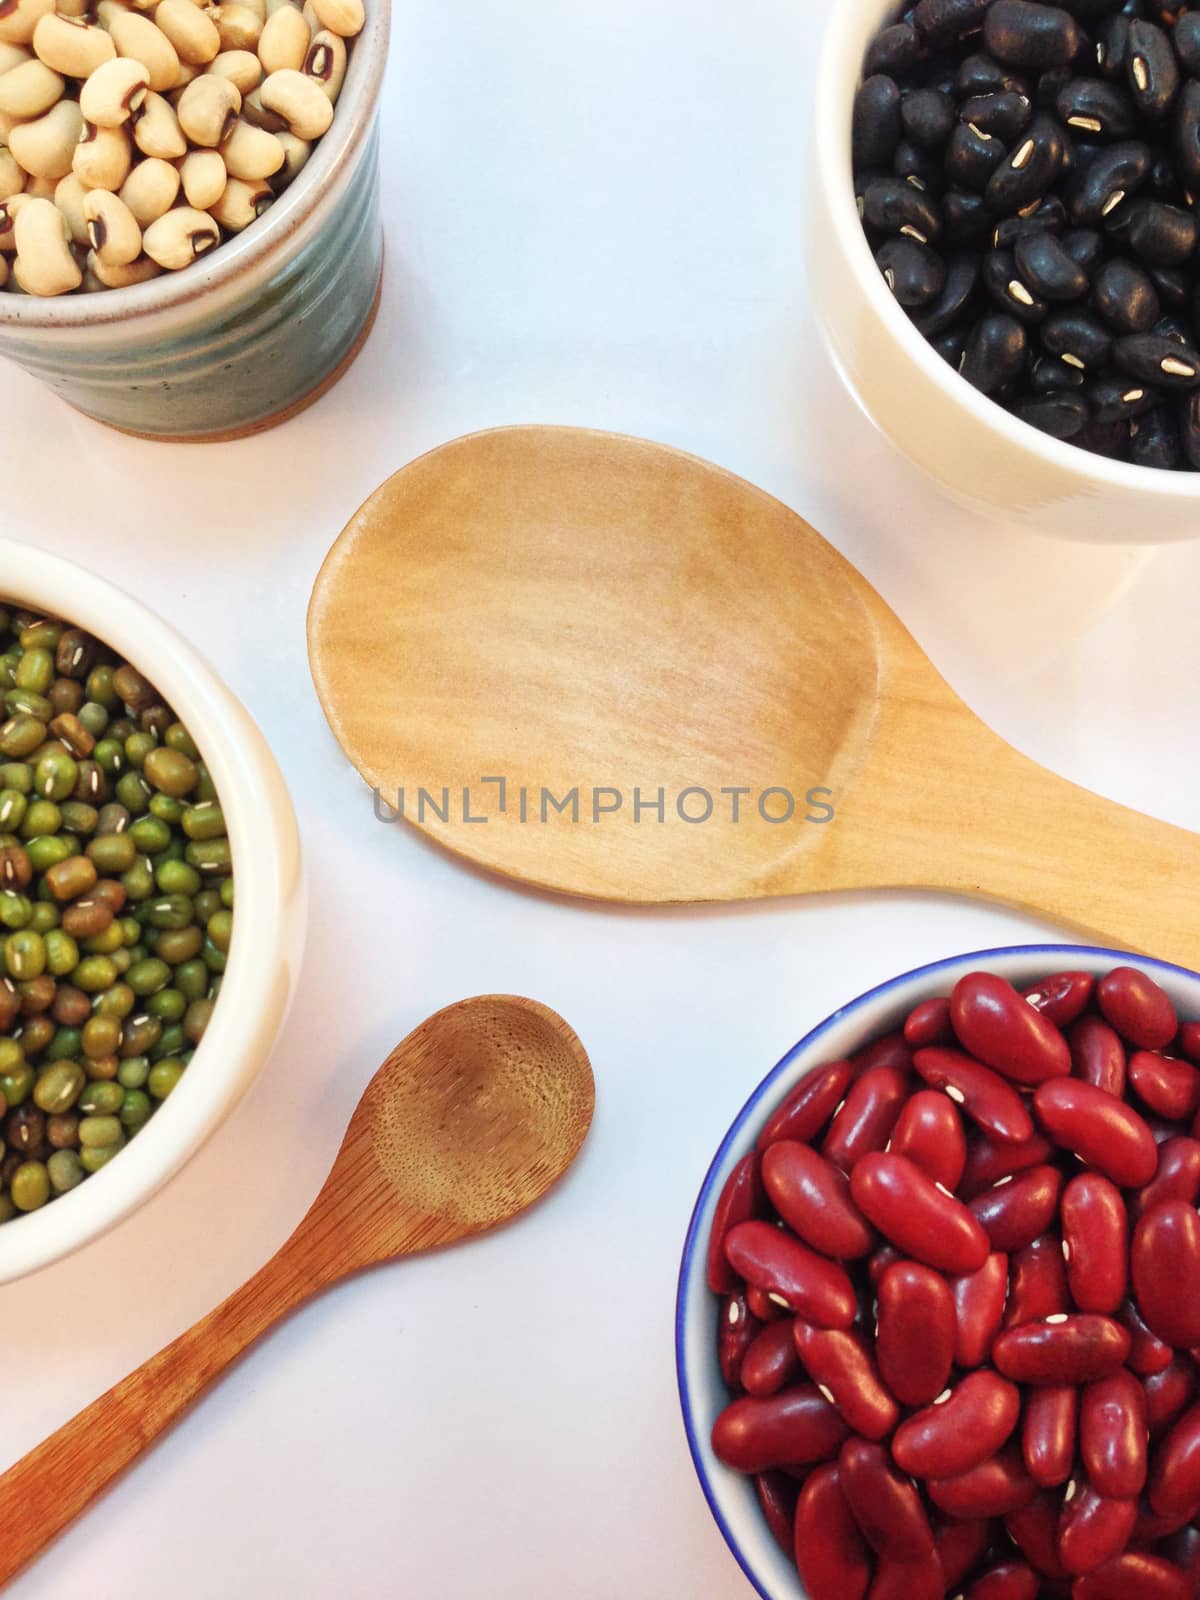 Black eye peas, mung beans, black beans and red kidney beans in a cup with wooden spoon and wooden ladle on white background